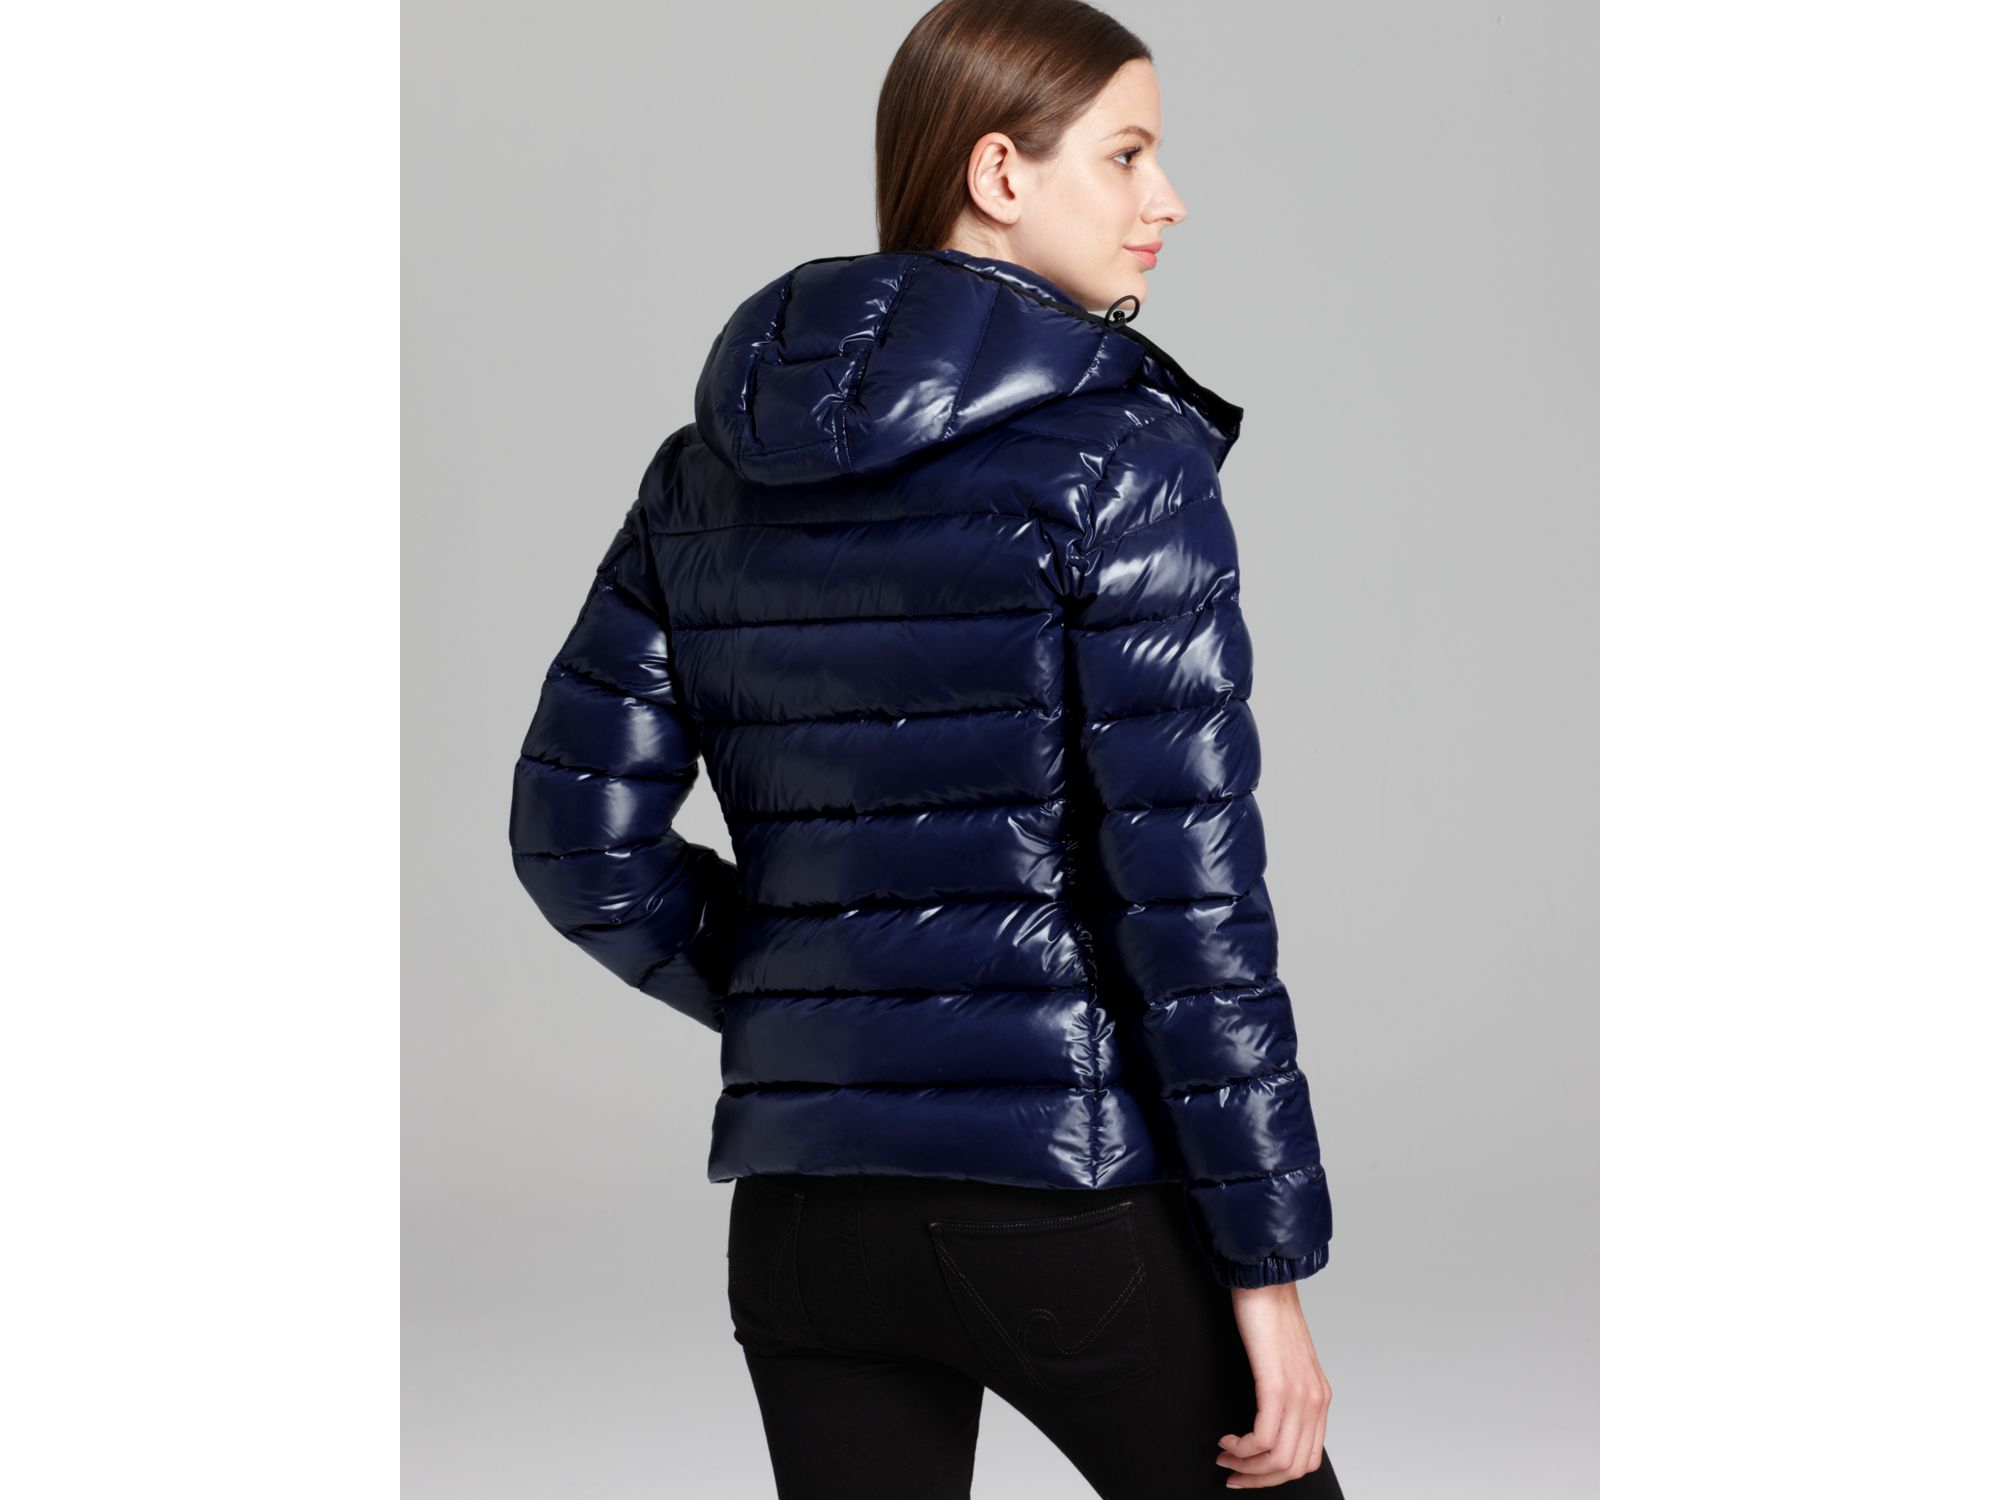 Lyst - Moncler Bady Lacquer Hooded Short Down Coat in Blue